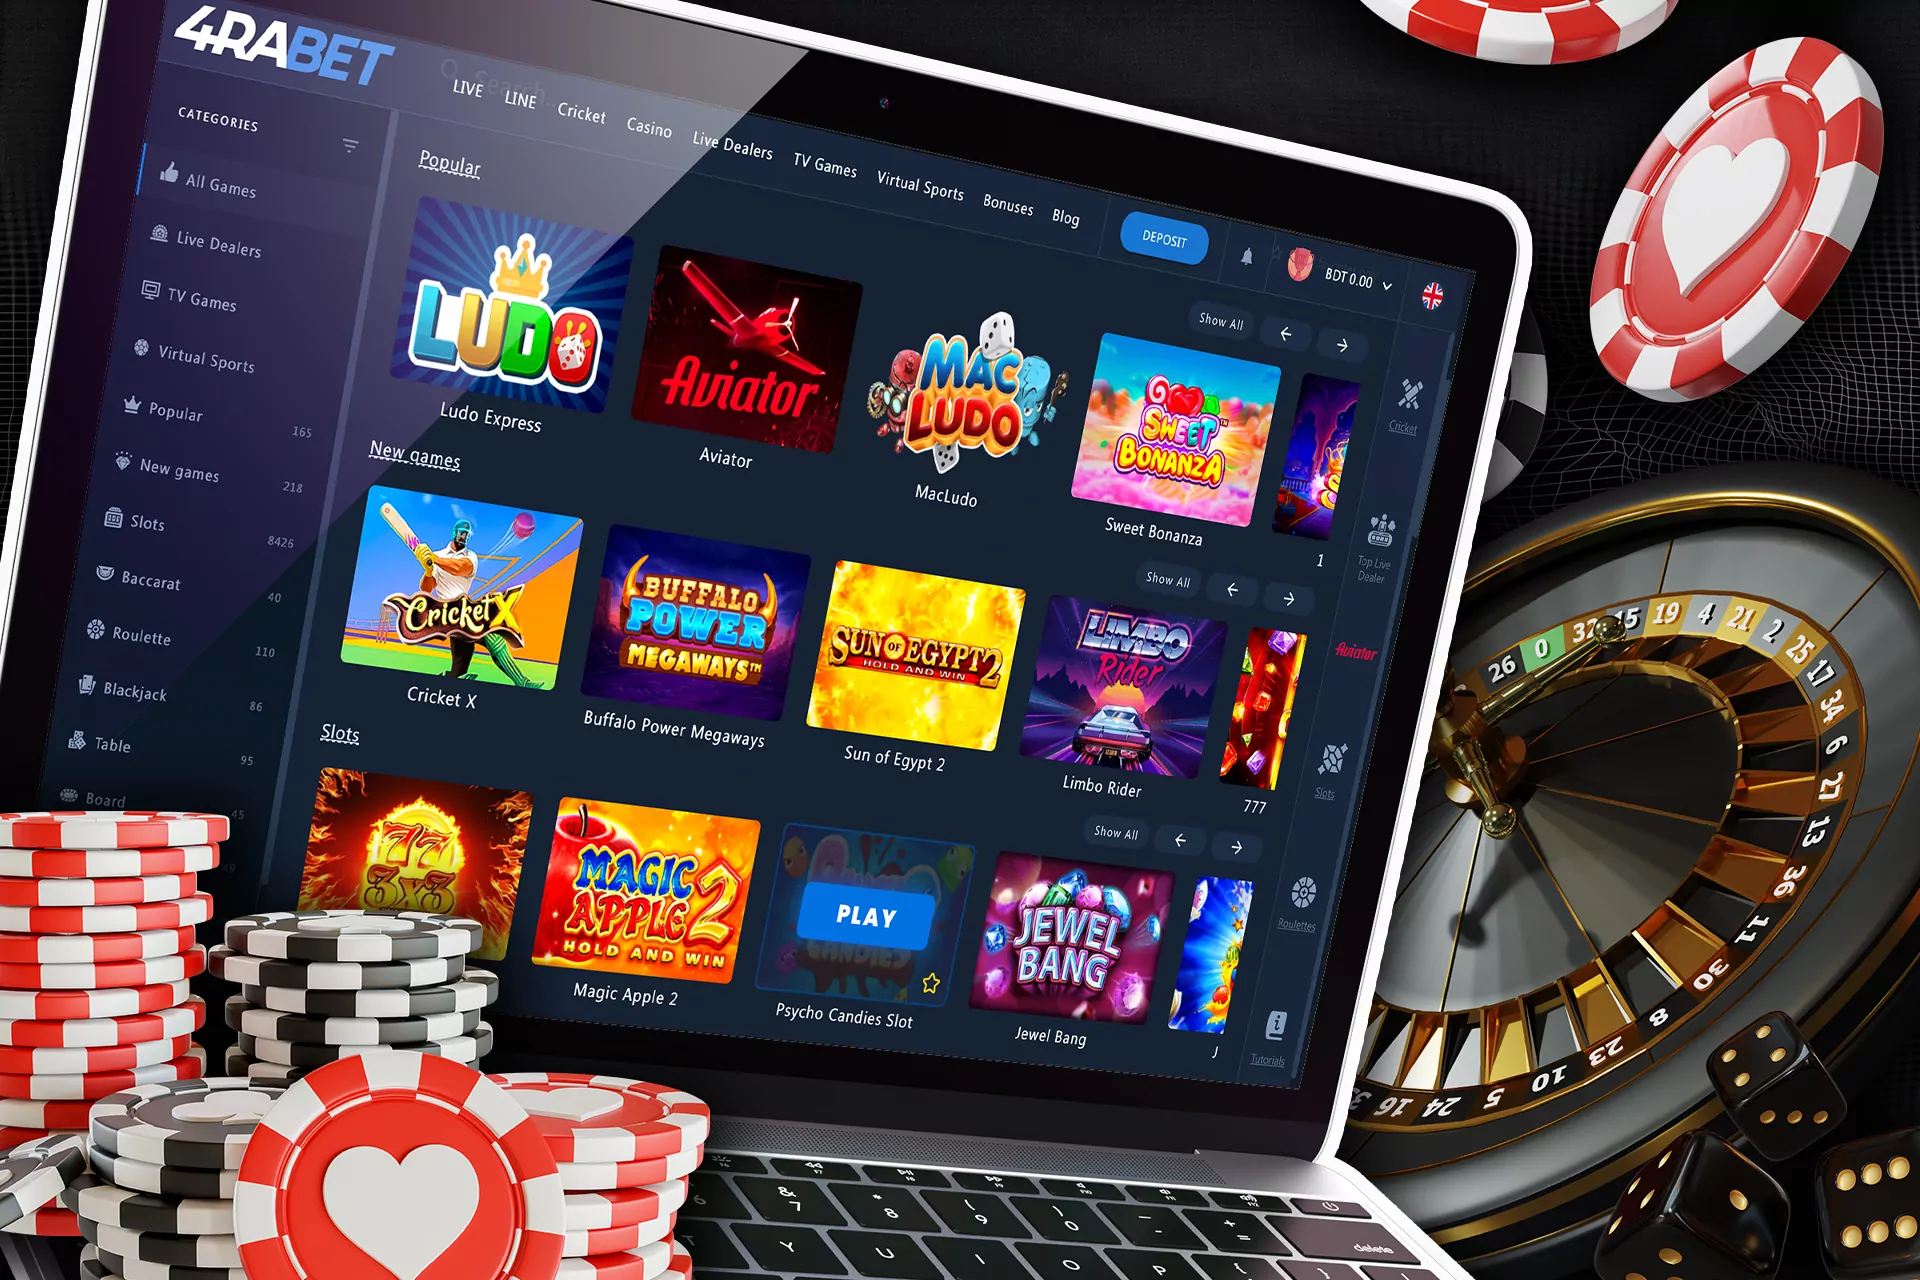 Visit the 4rabet casino section to play slots or board games.